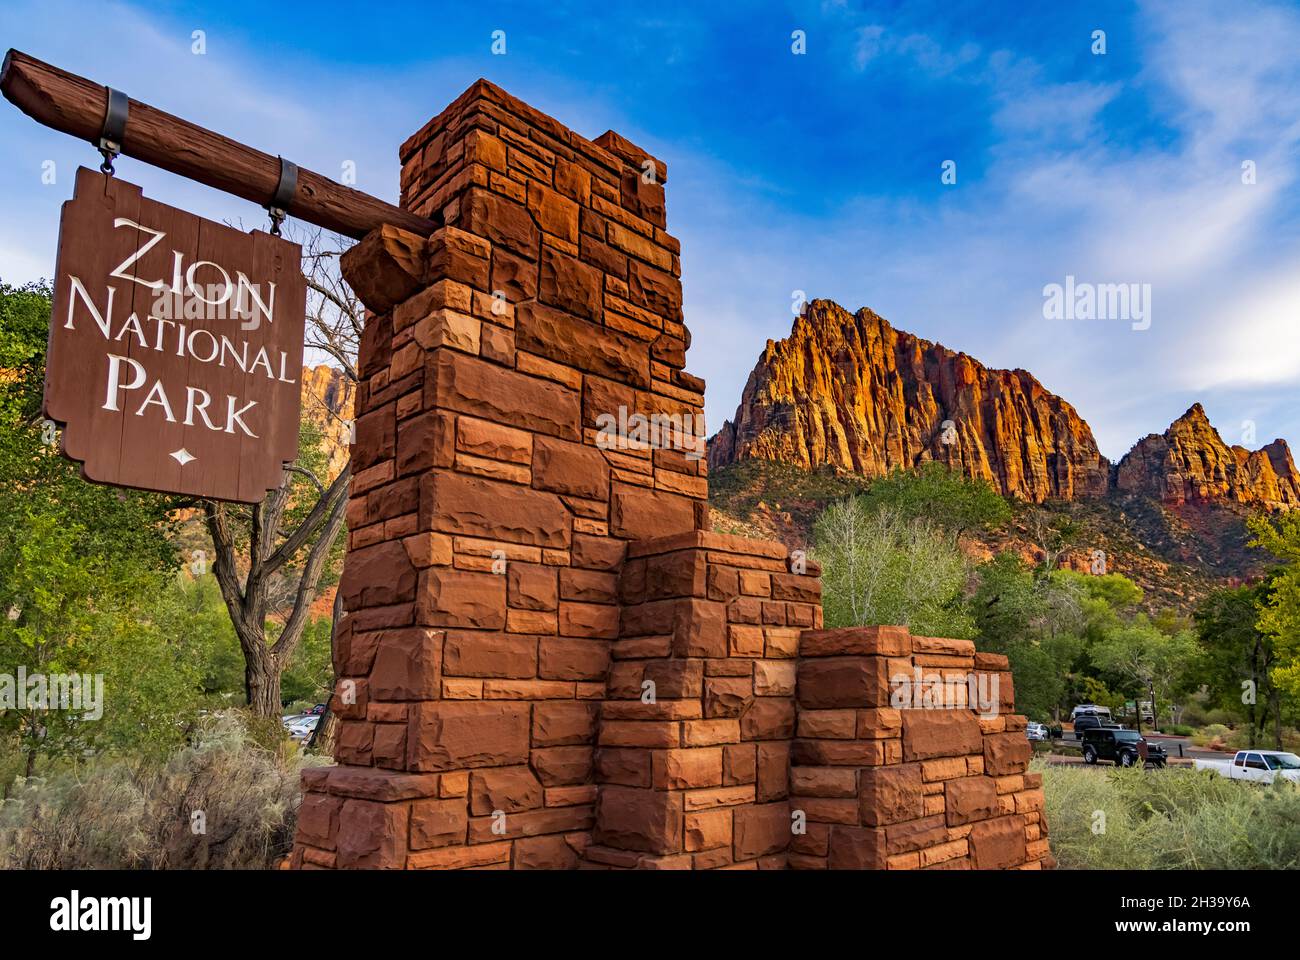 This is a view of the sign at the walk-in entrance to Zion National Park, Springdale, Washington County, Utah, USA.  The Watchman is in the distance. Stock Photo